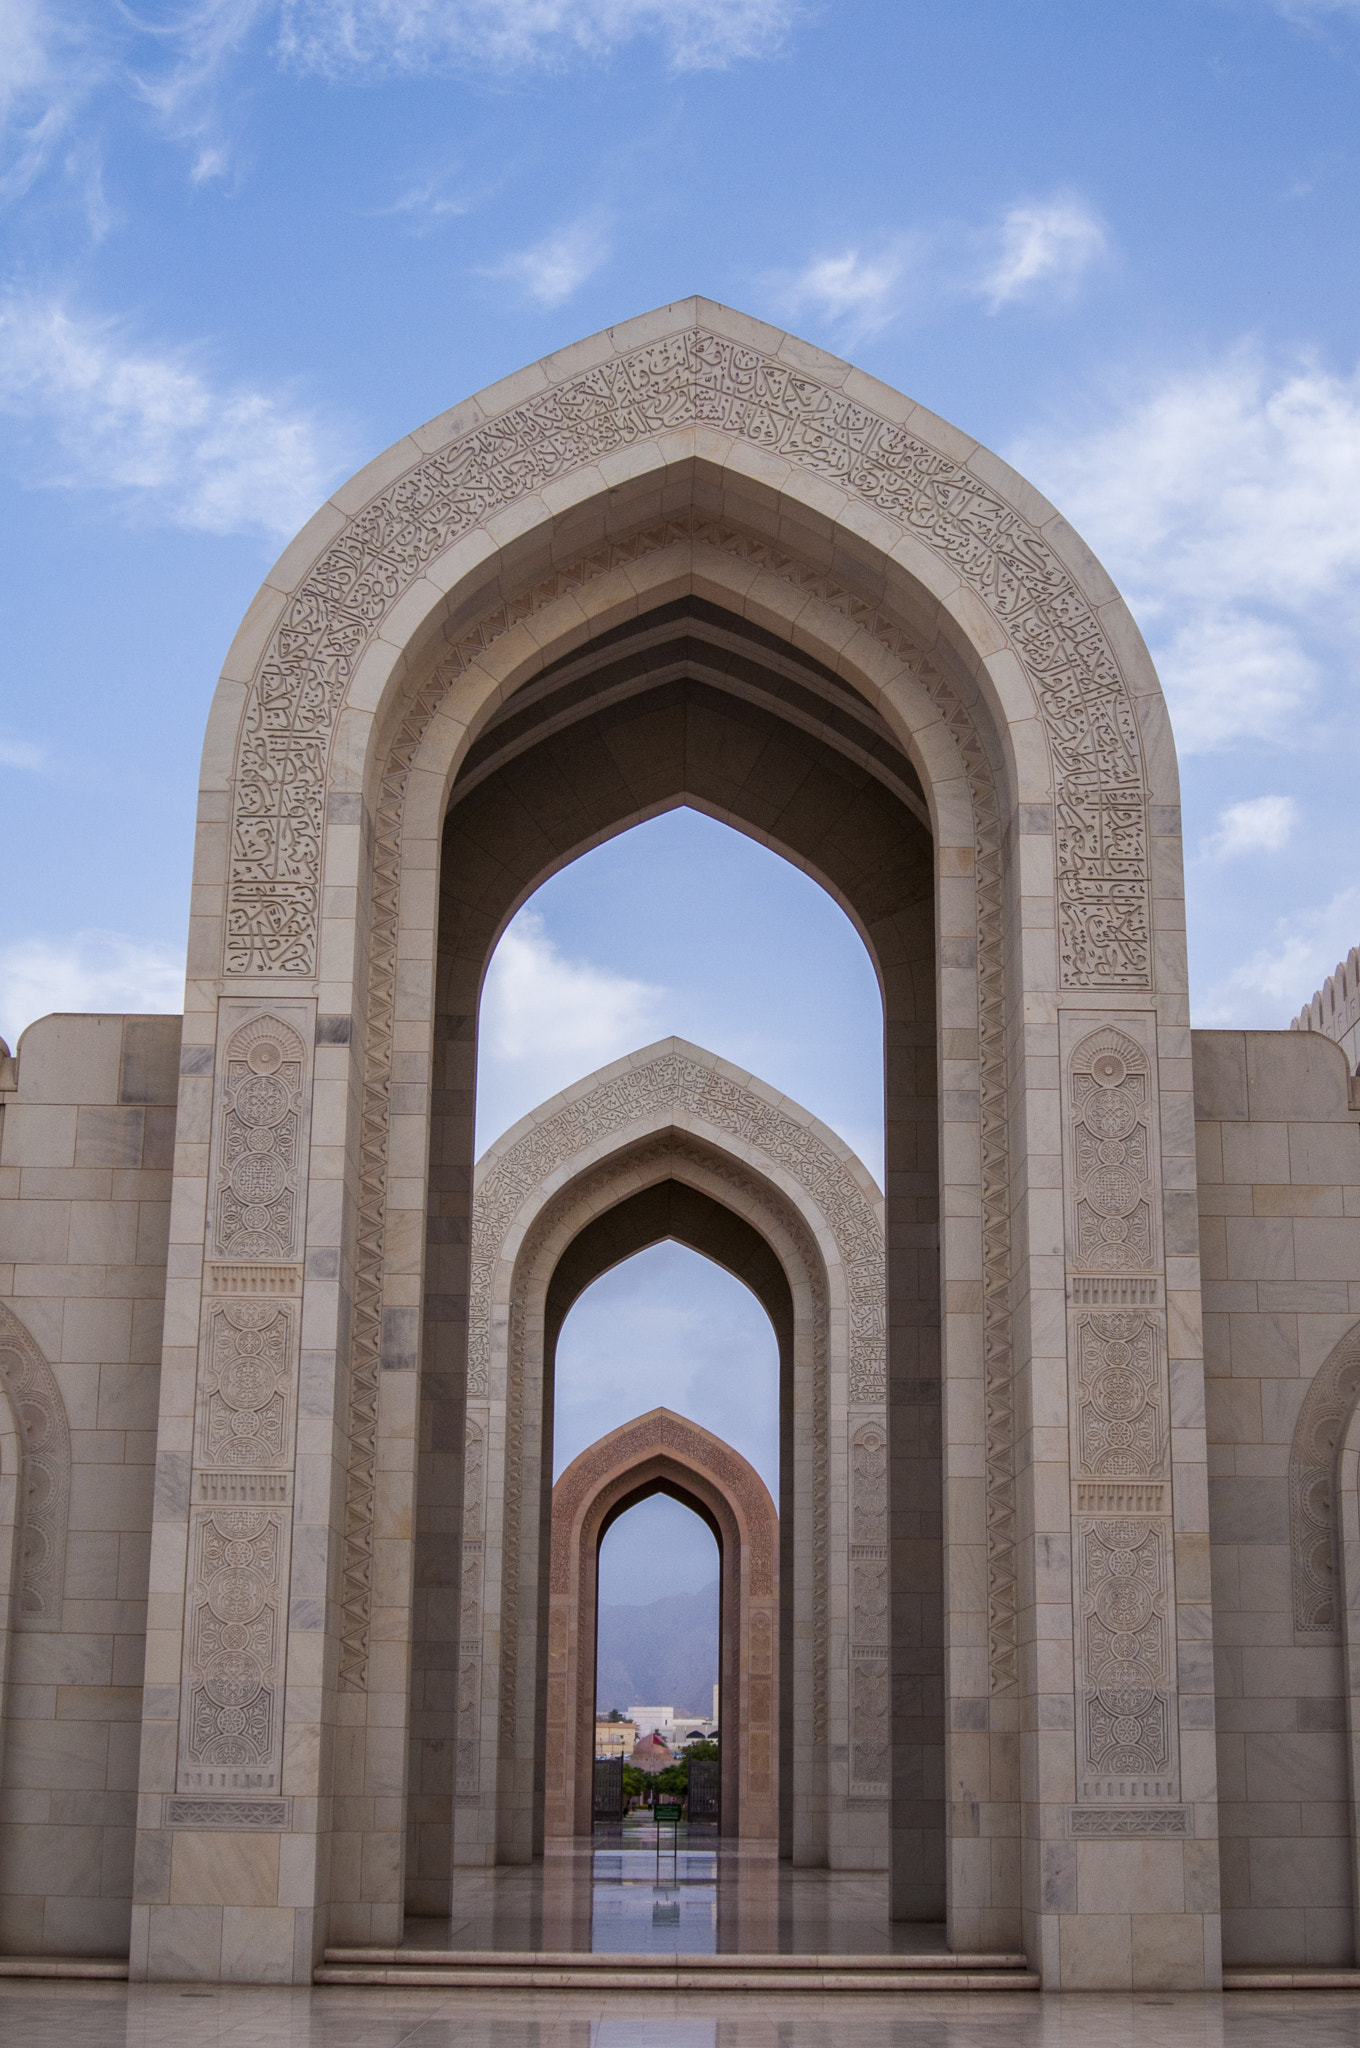 Nikon D90 sample photo. The aligned archways photography